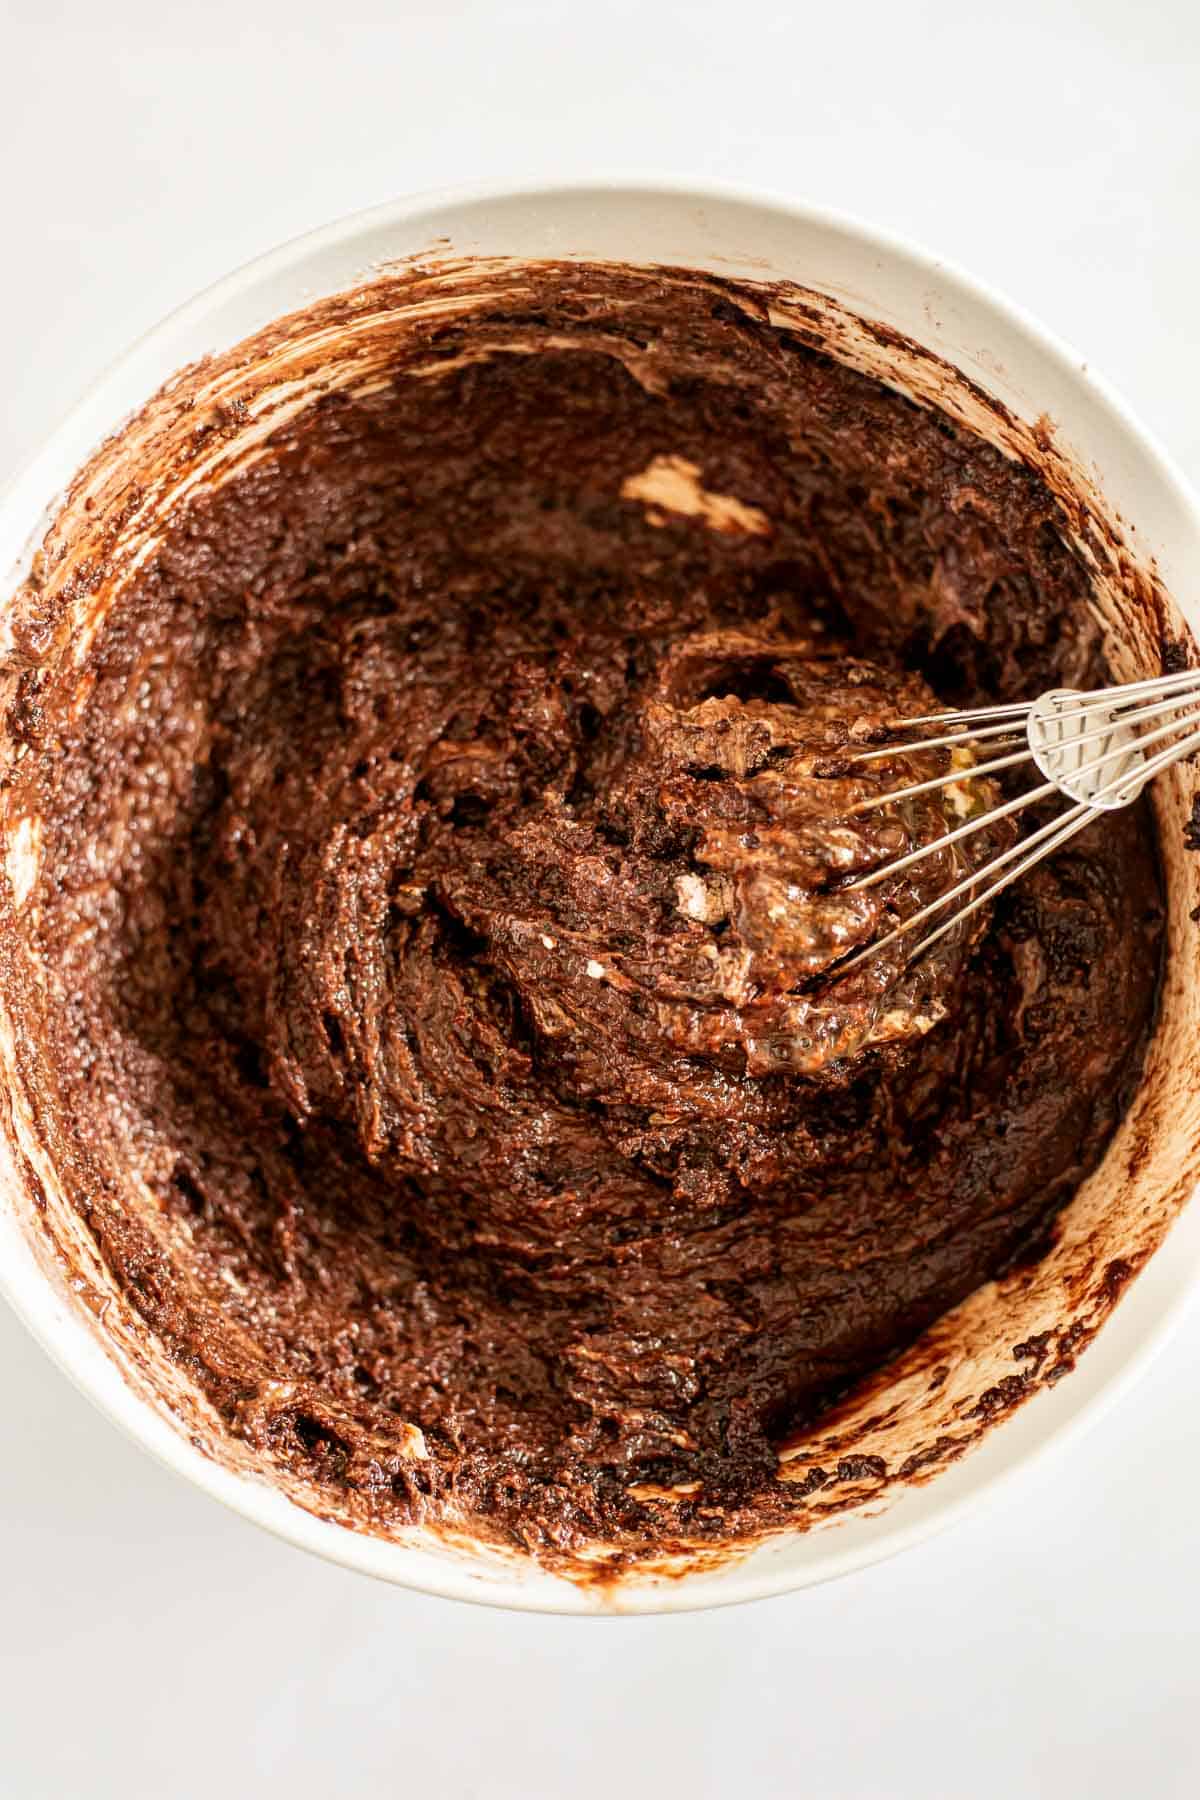 flour, sugar, and cocoa powder whisked with eggs and oil in a white bowl.